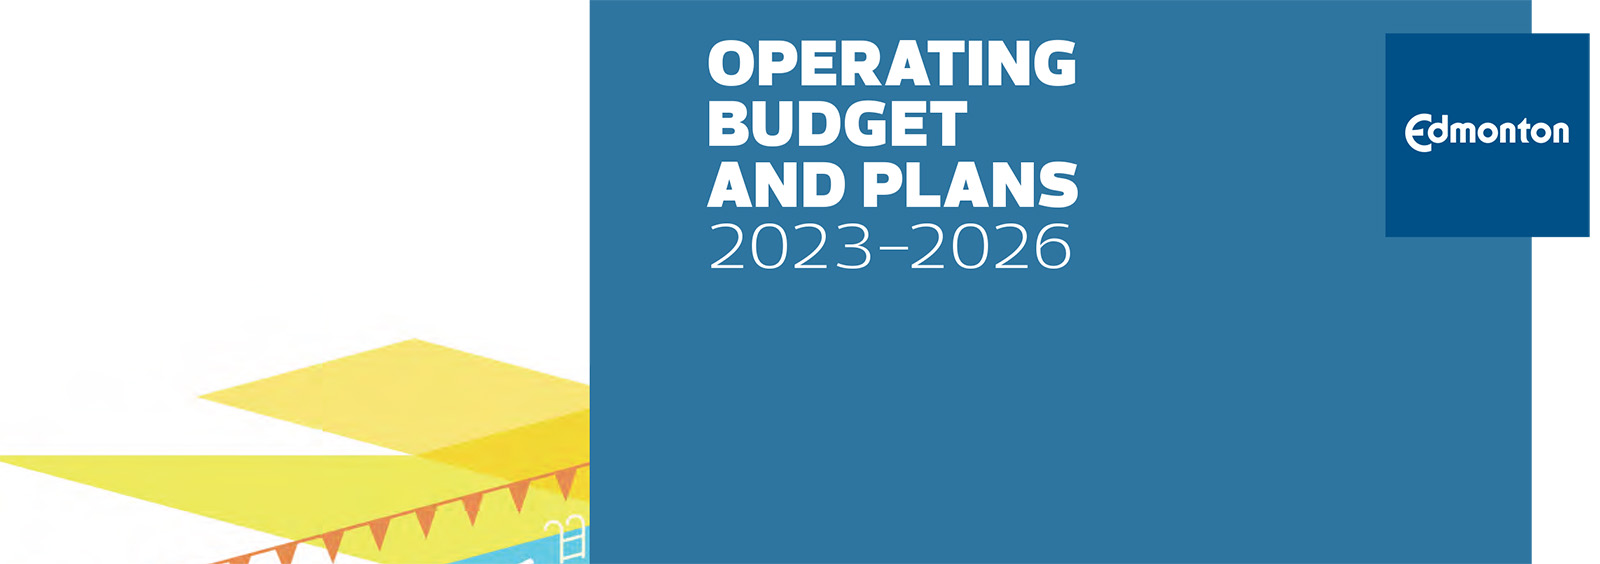 Operating Budget document cover